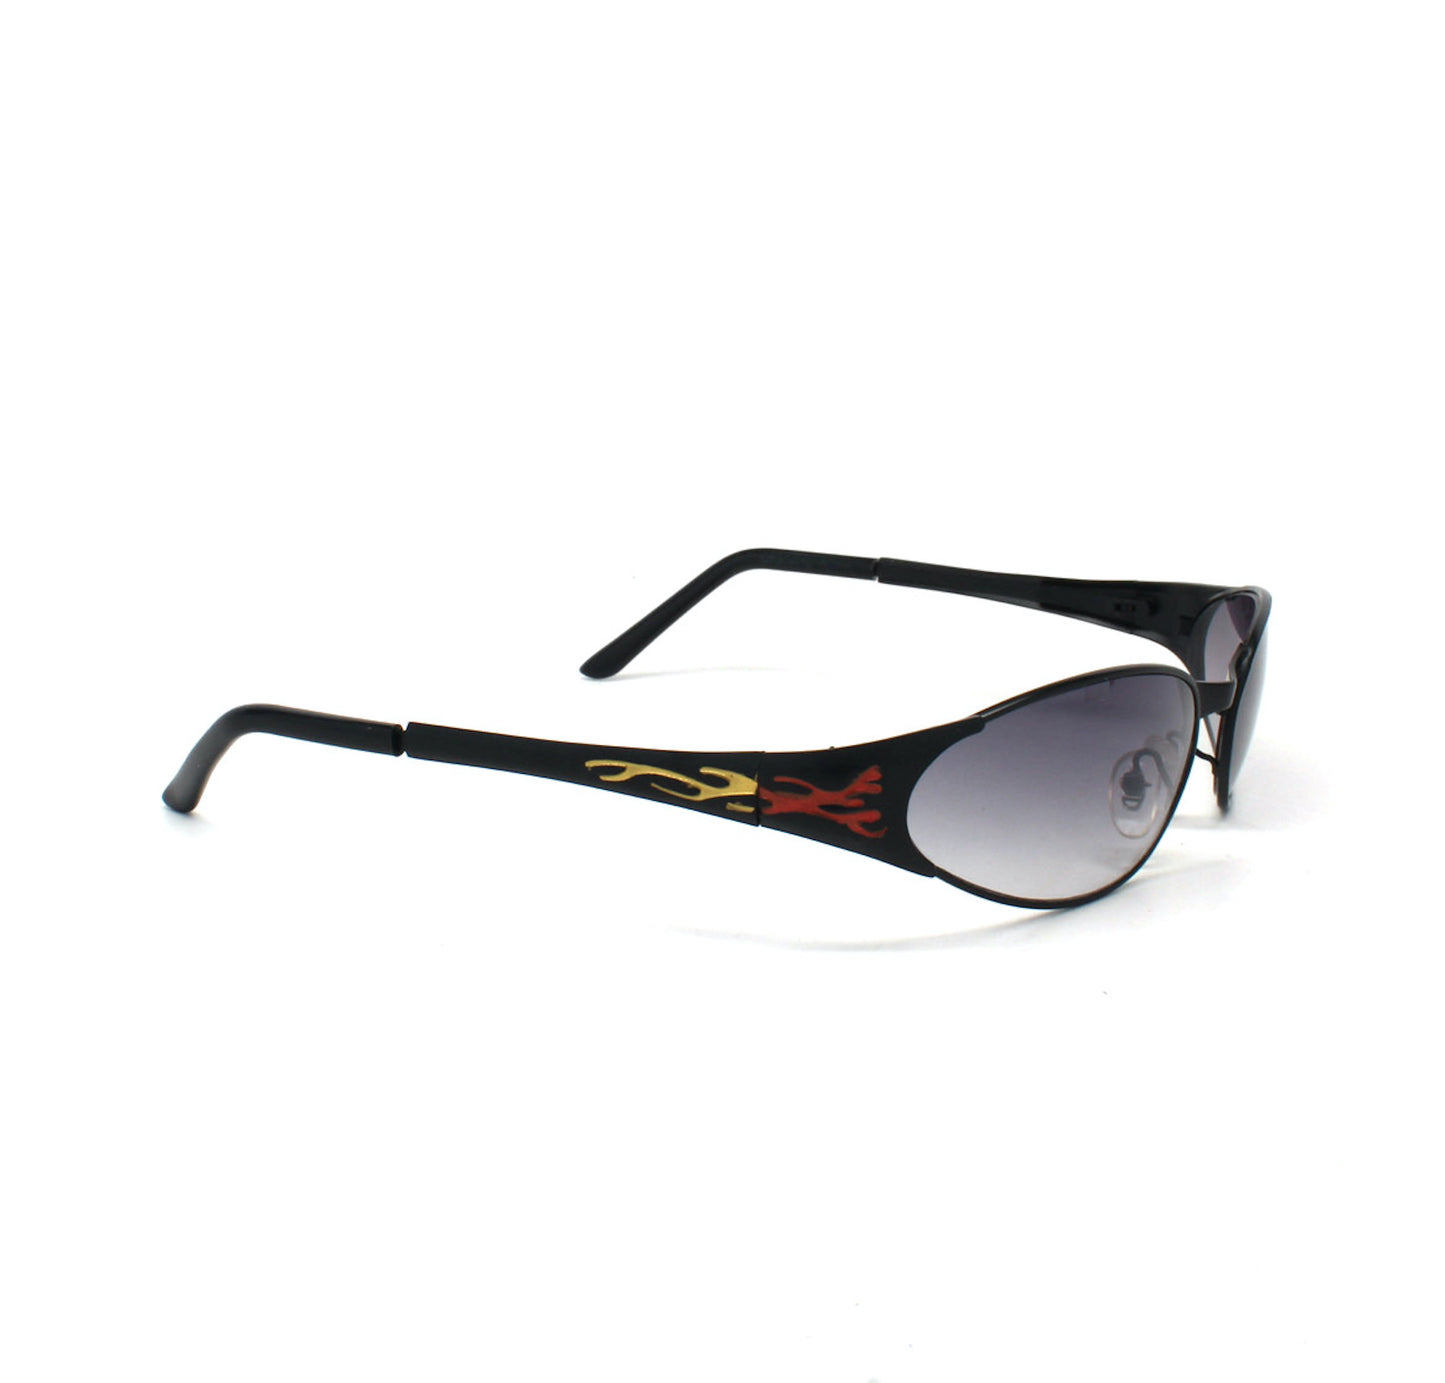 X-Static 1999 Flame Oval Style Sunglasses - Black